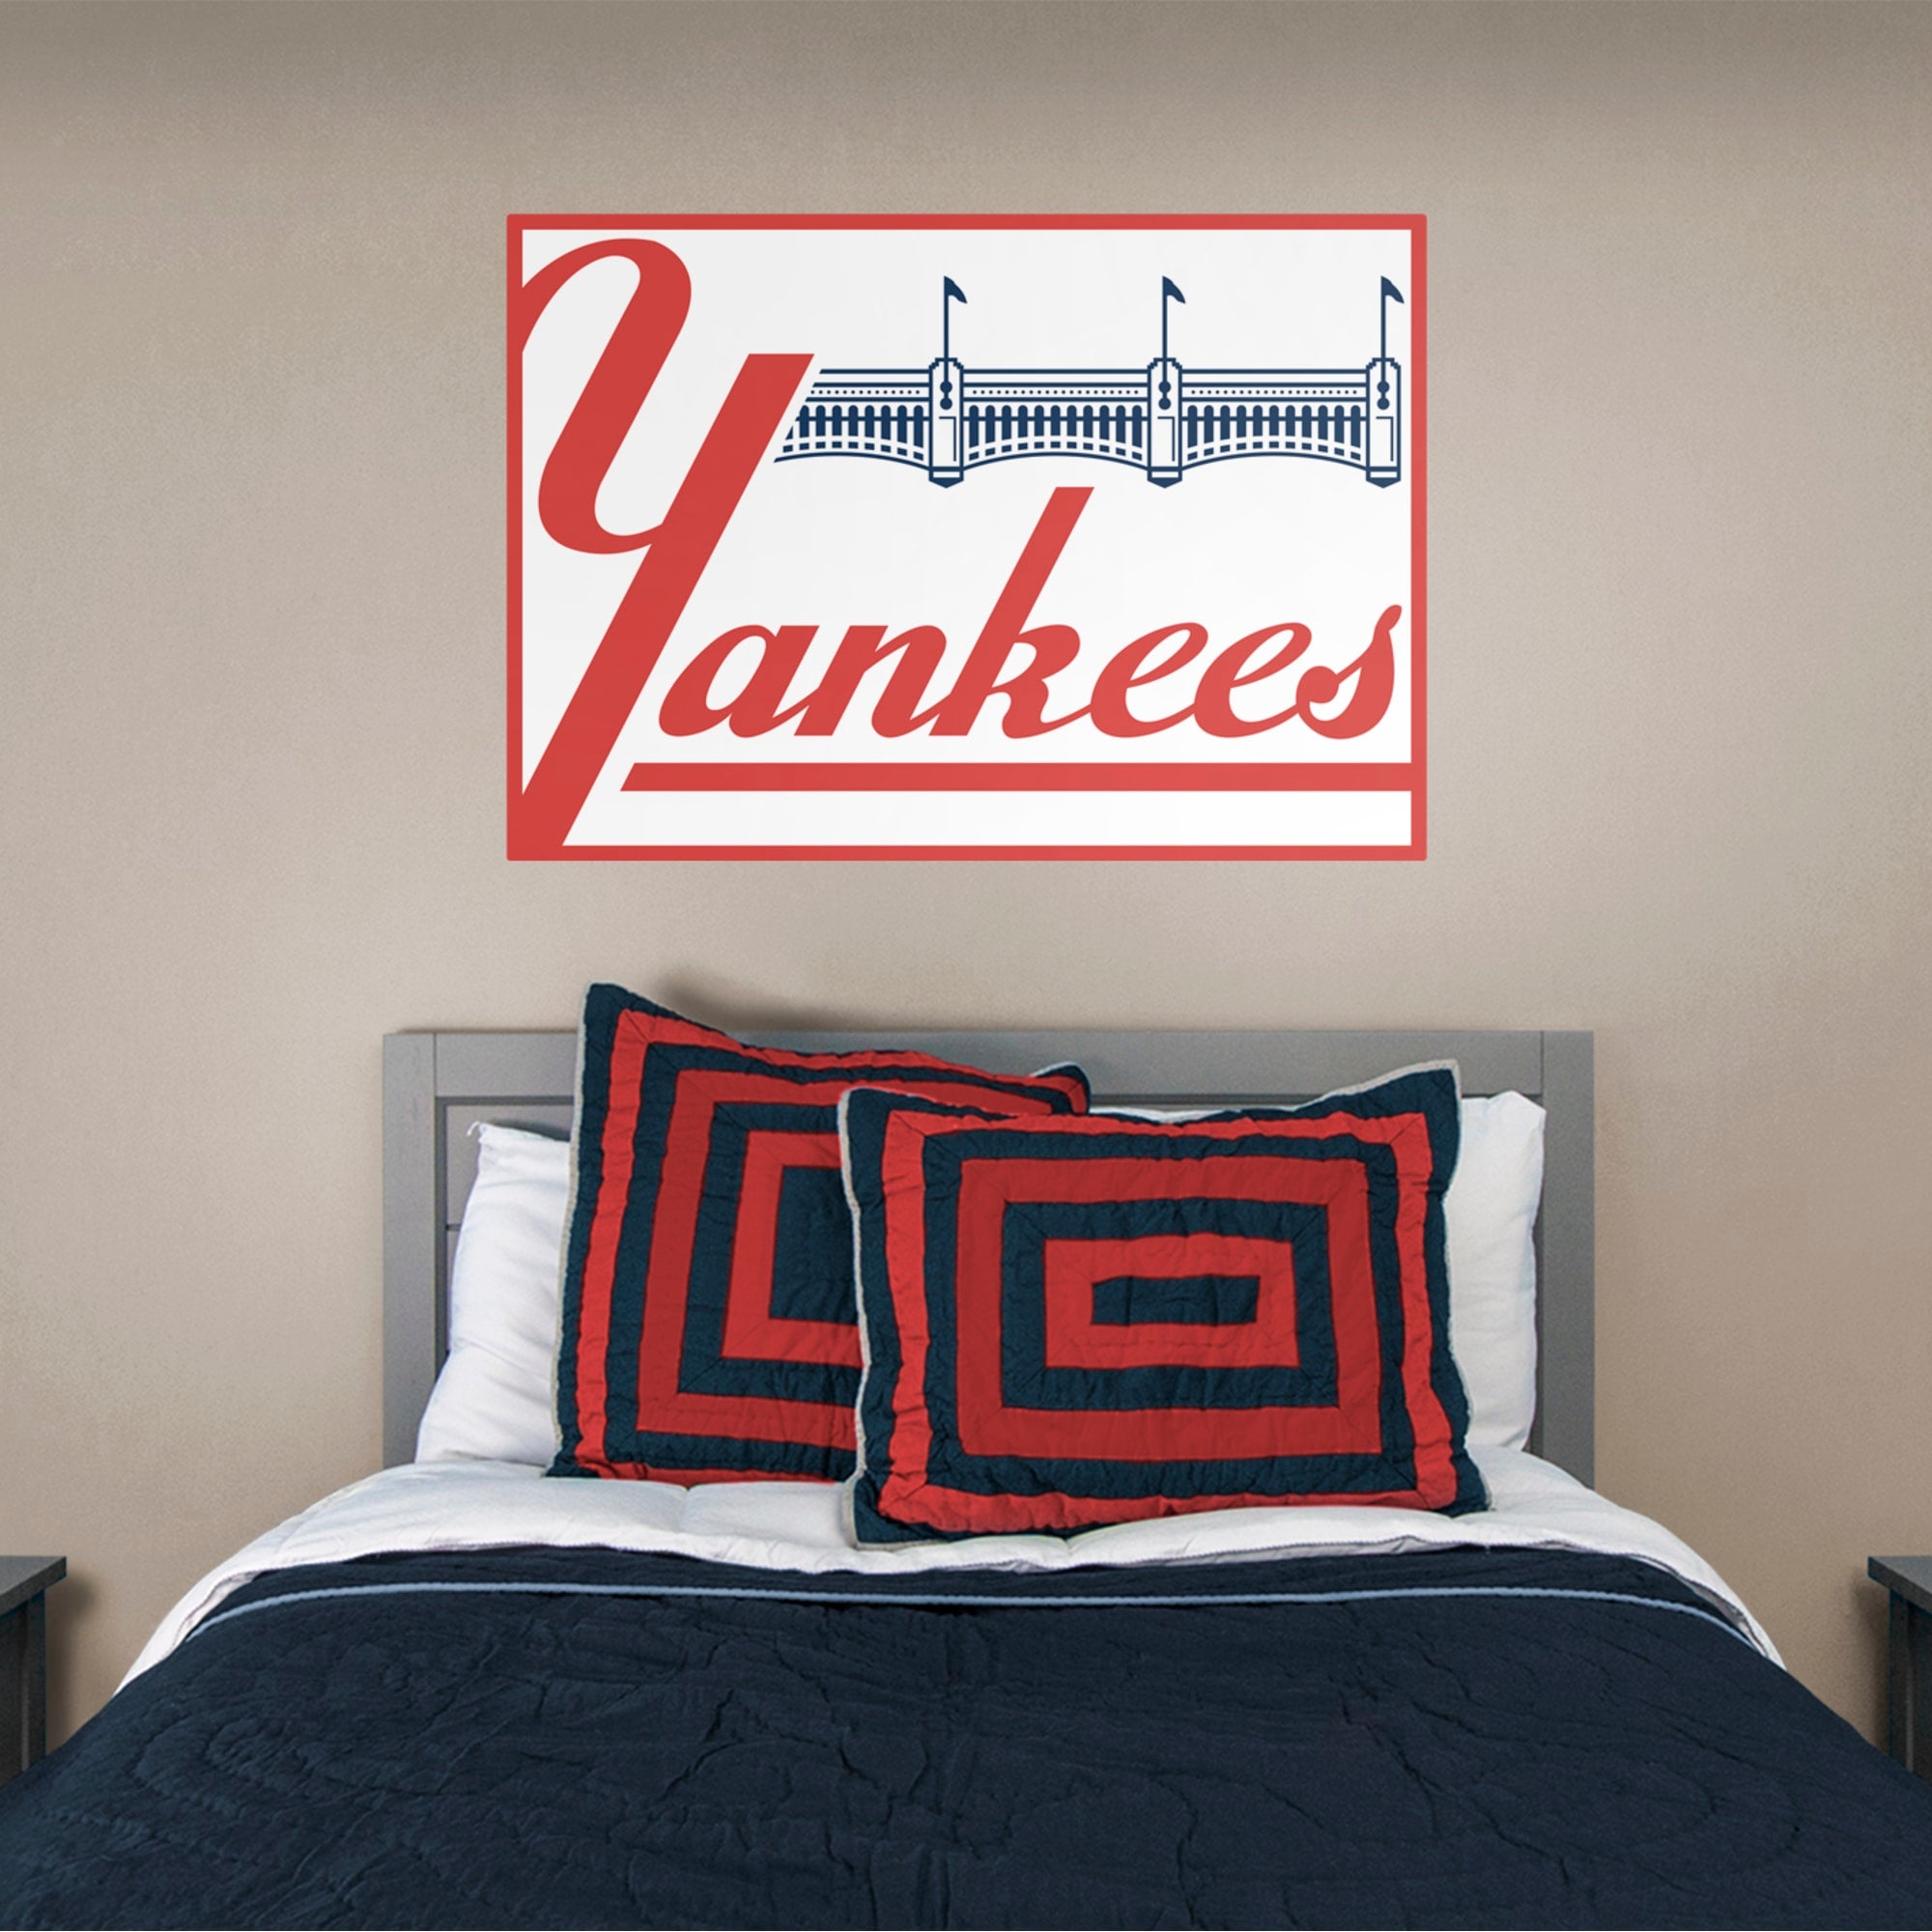 New York Yankees: Classic Logo - Officially Licensed MLB Removable Wall Decal 44.0"W x 31.0"H by Fathead | Vinyl